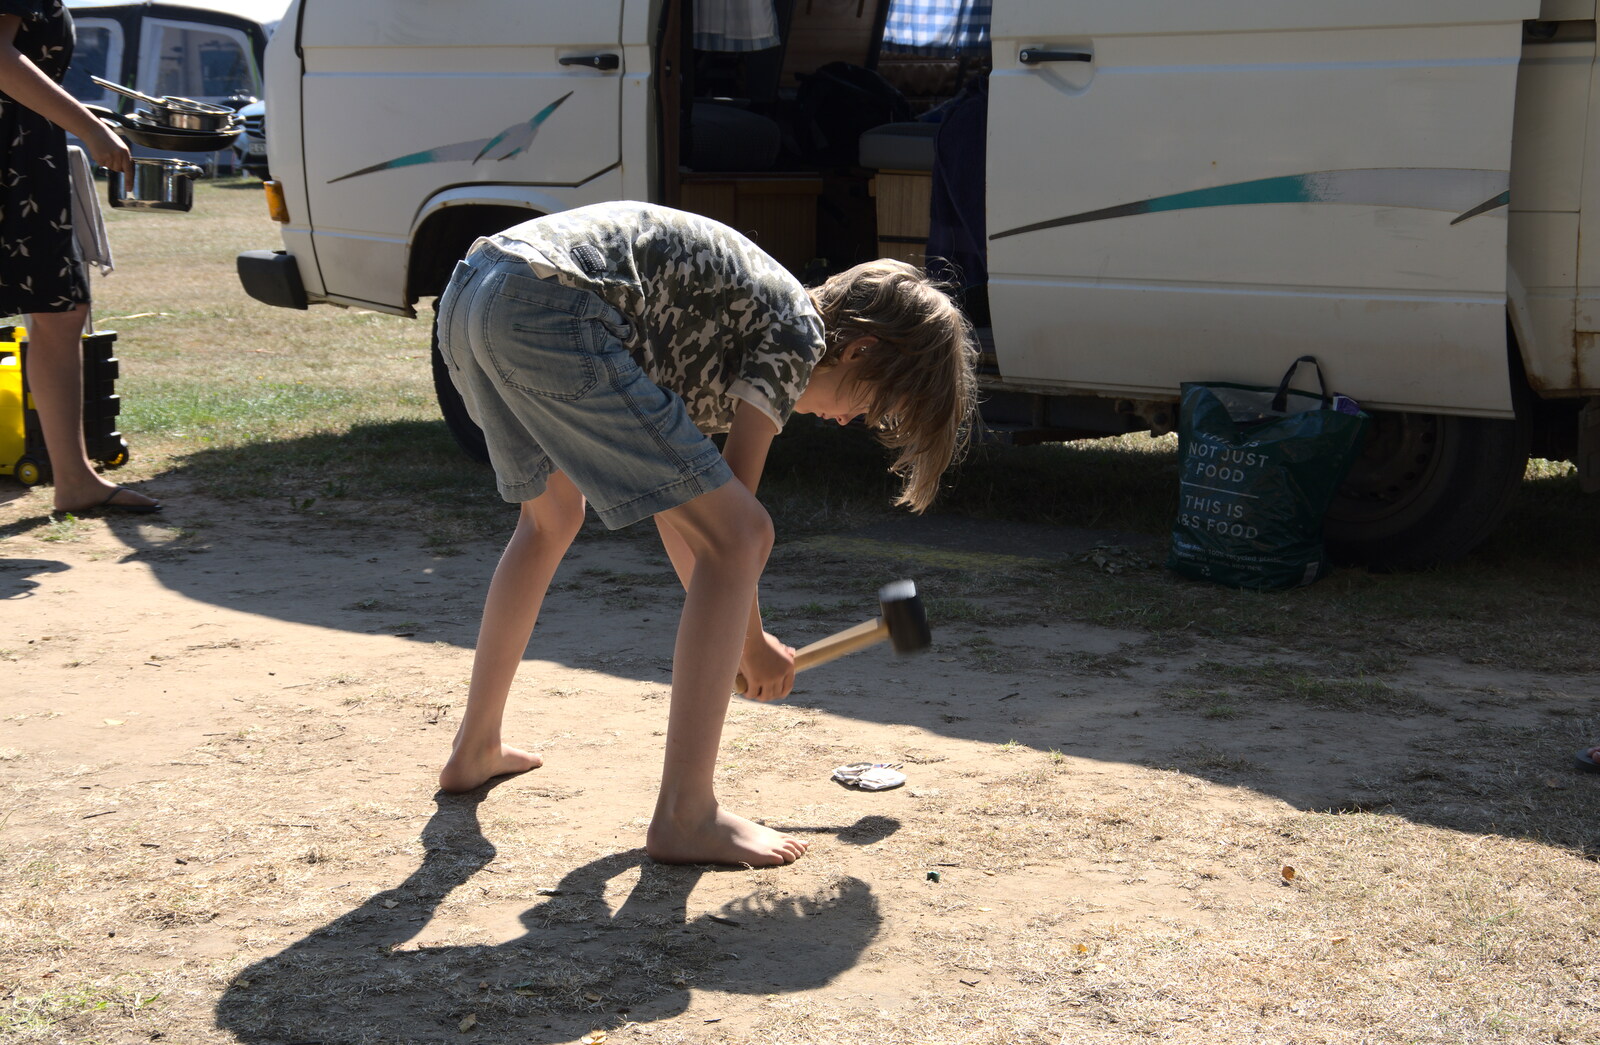 Harry 'helps' by bashing up an empty can from Camping at Forest Park, Cromer, Norfolk - 12th August 2022